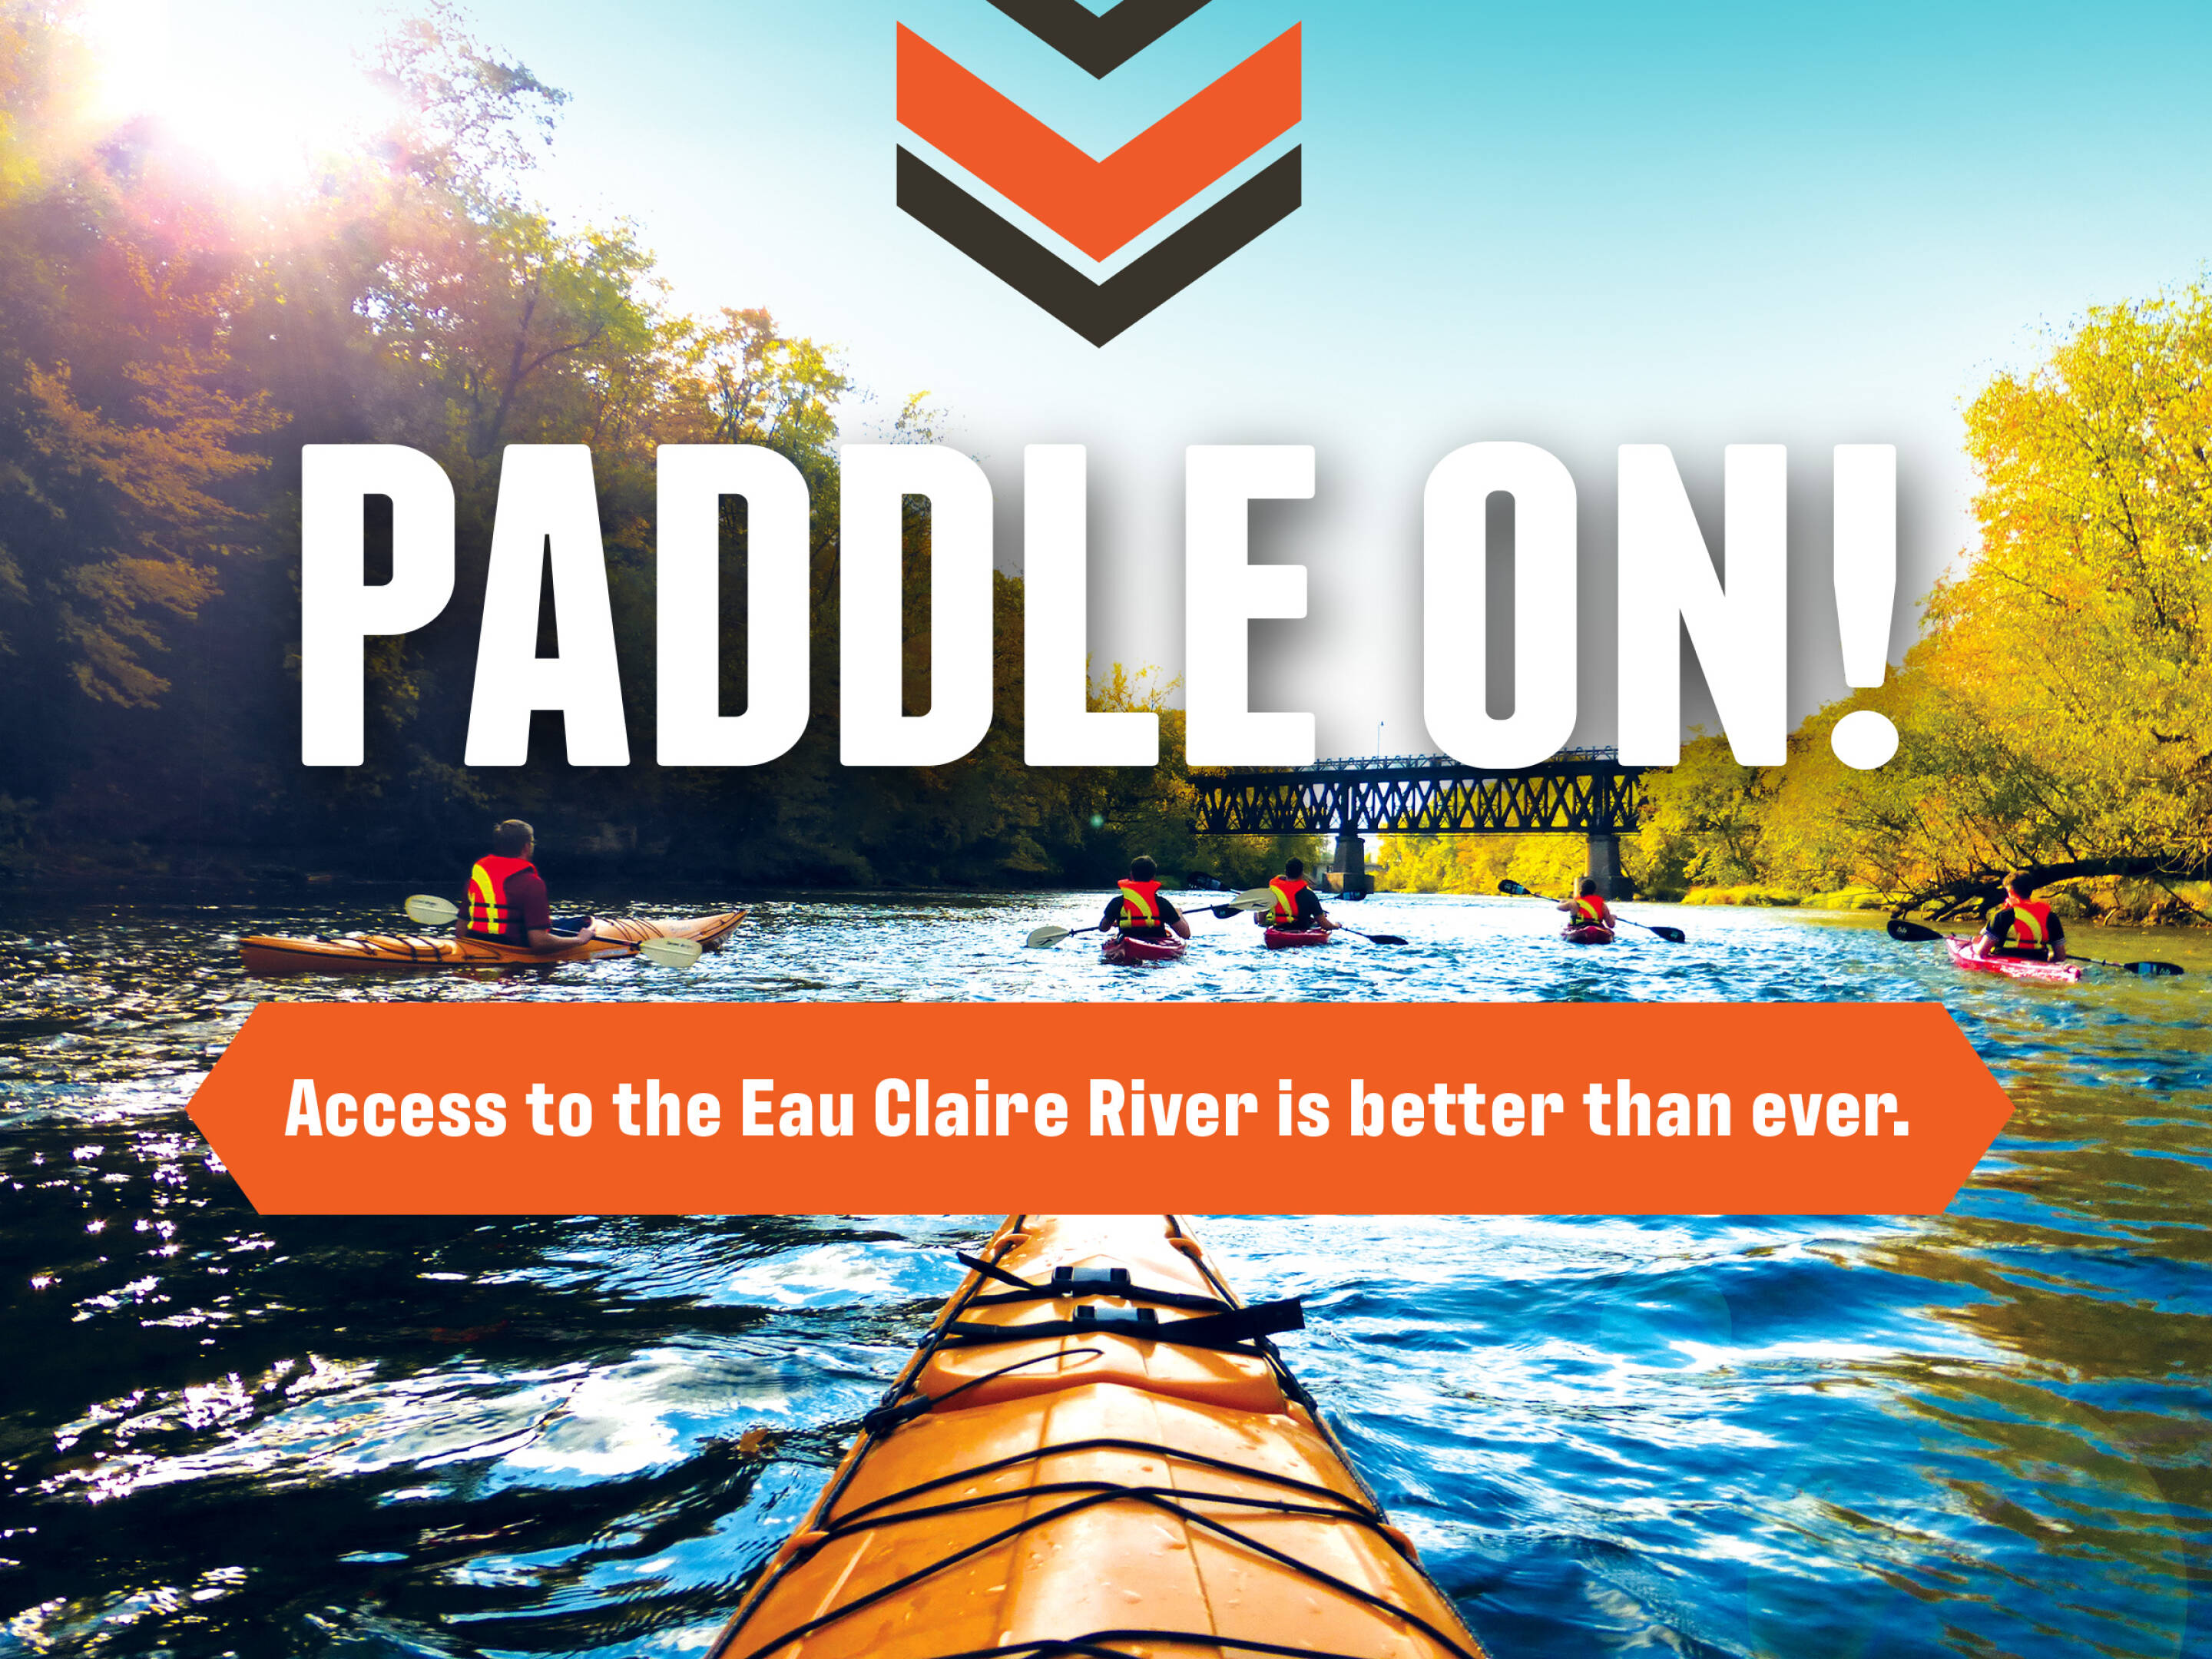 Paddle On: Access to the Eau Claire River is better than ever.